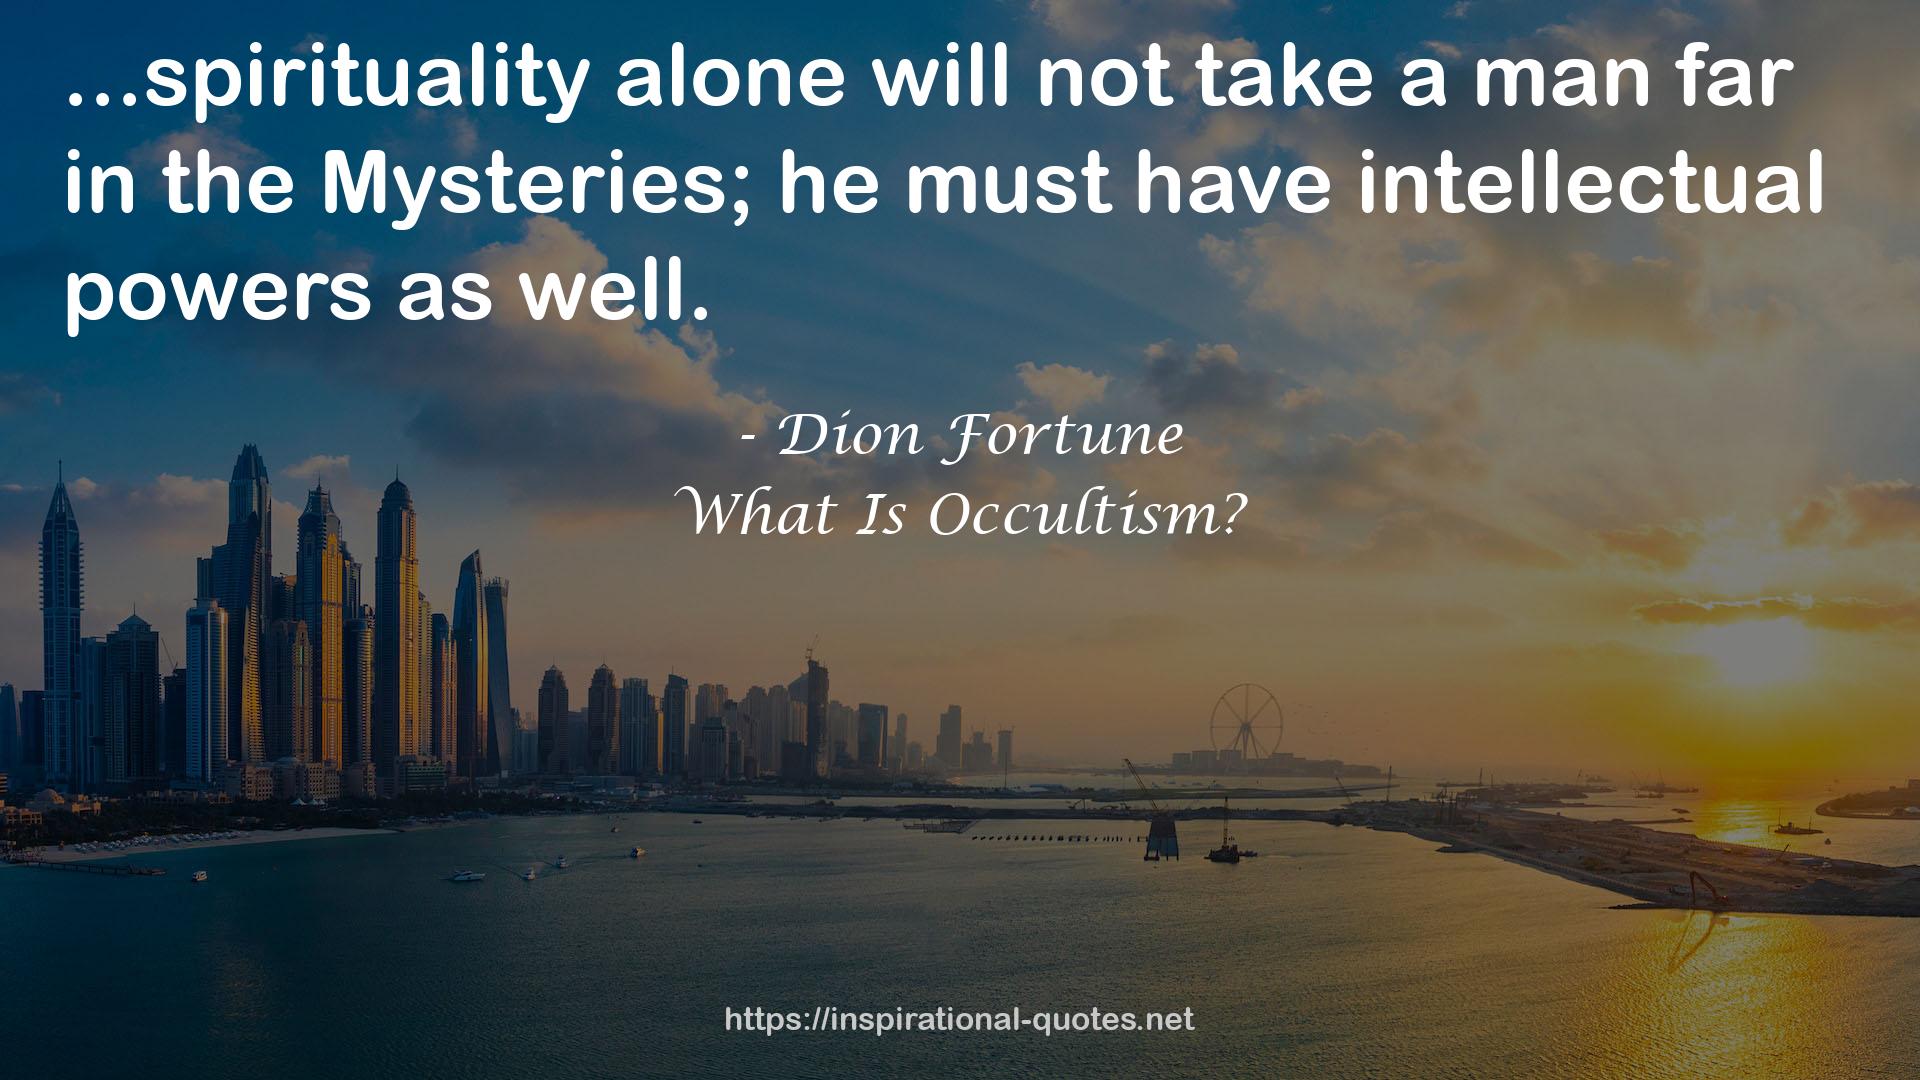 What Is Occultism? QUOTES